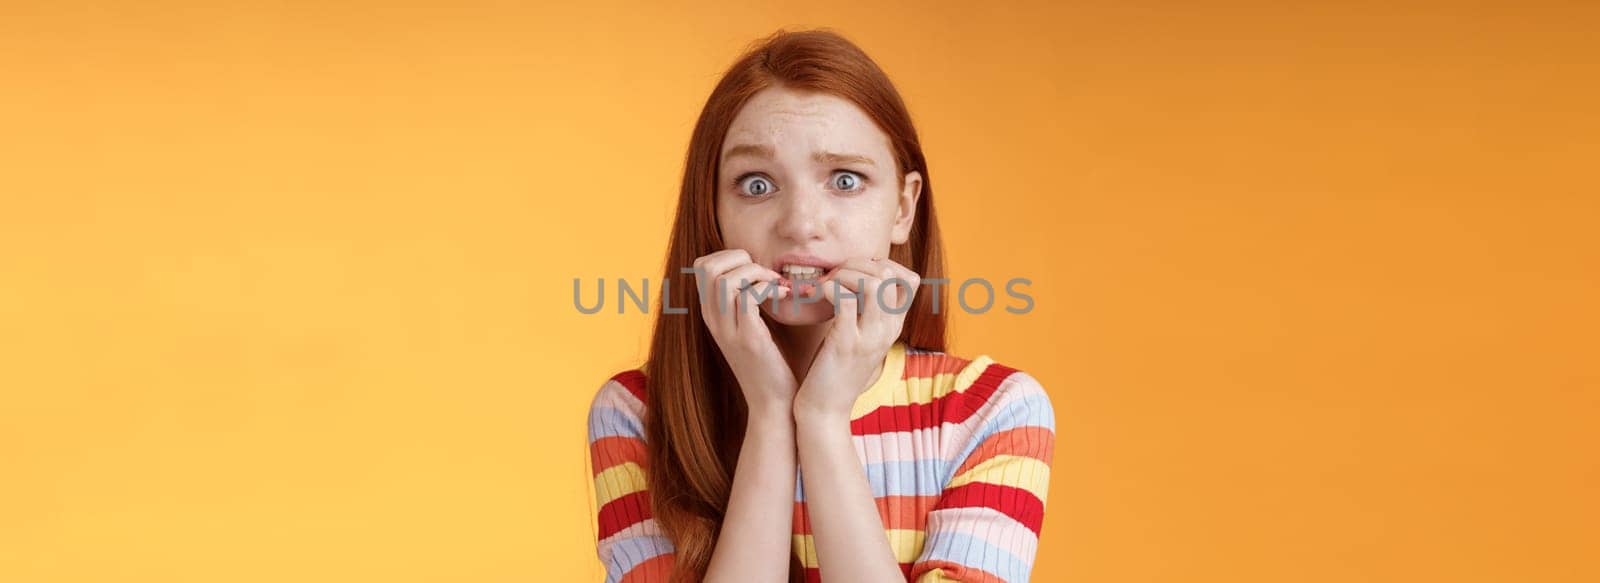 Anxious unconfident timid insecure redhead cute girl worry trembling fear consequences biting fingernails frowning grimacing frightened, standing nervously orange background awaiting scary moment.